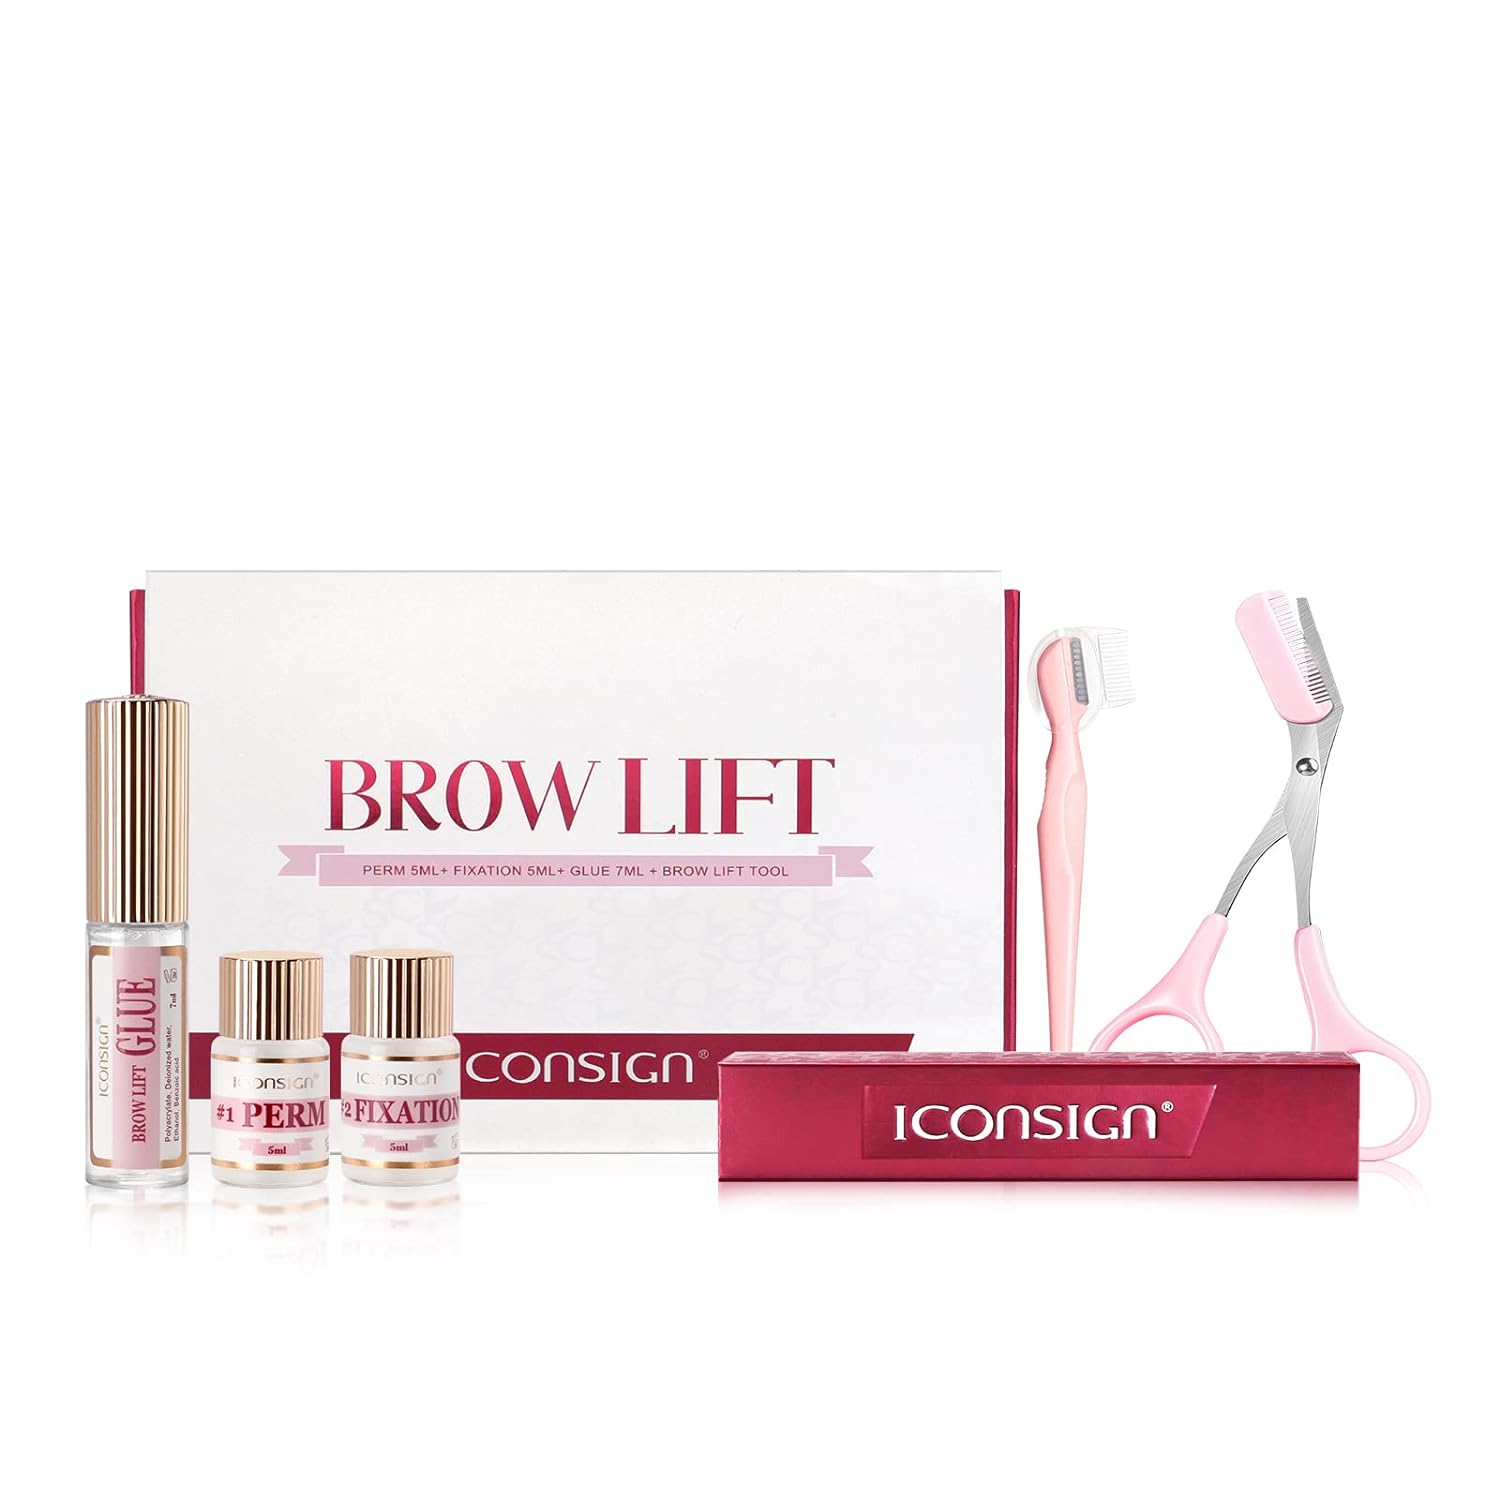 Brow Lamination Kit, ICONSIGN Eyebrow Lift Kit Professional Salon Result Create Fuller Eyebrows Look Lasts 8 Weeks, Suitable for Salon & Home Use